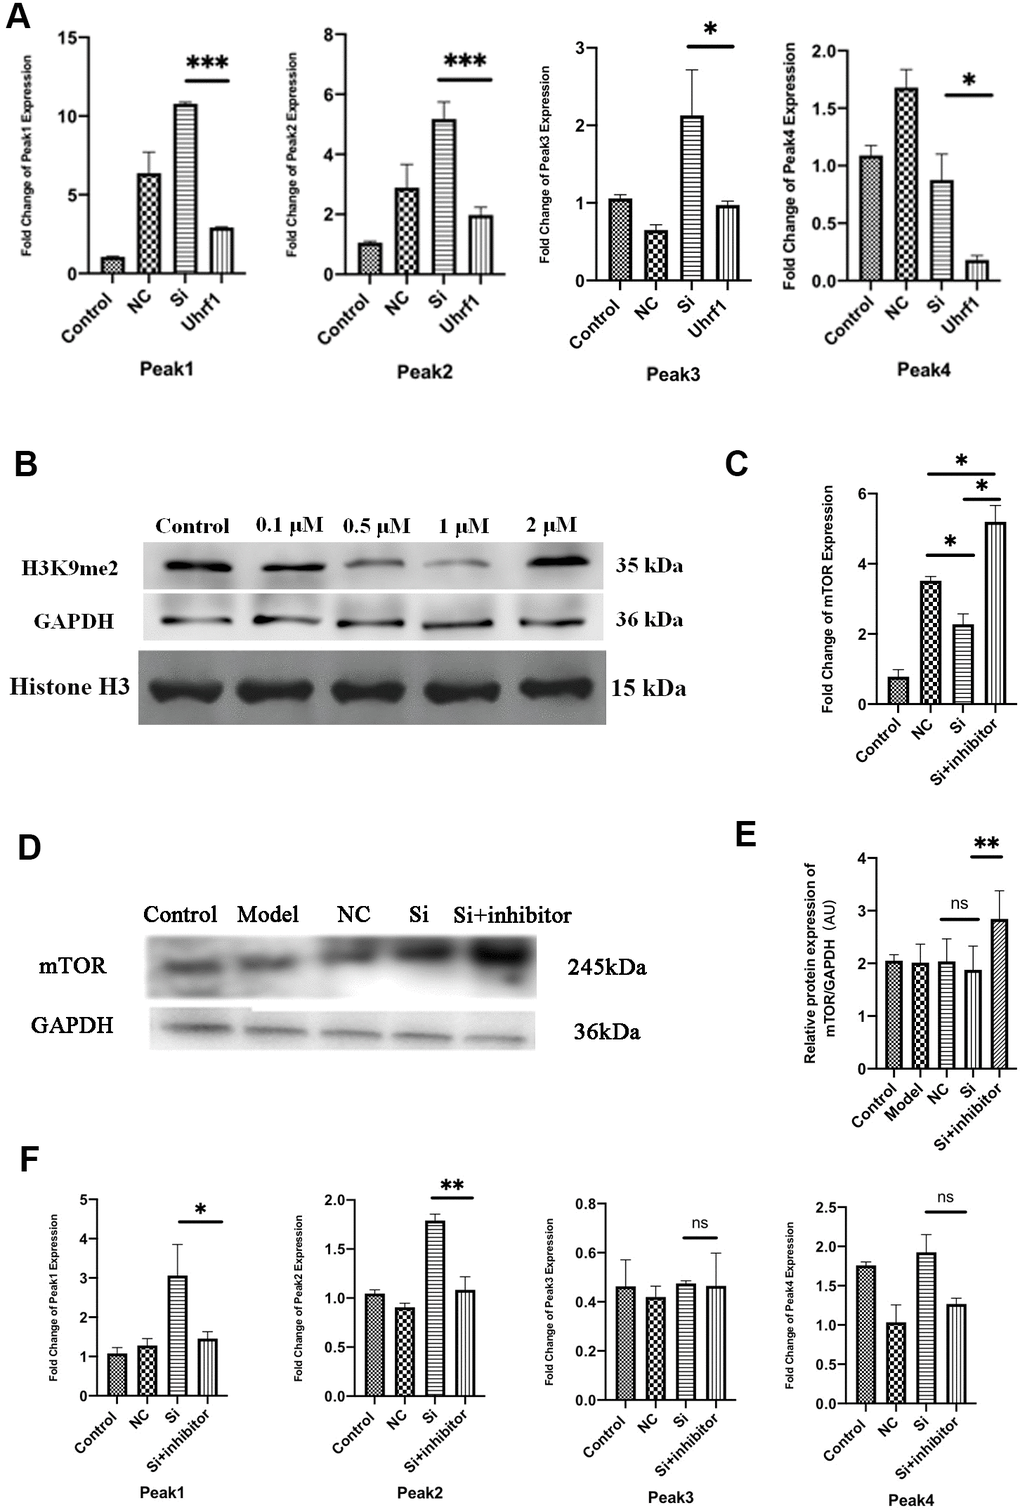 Uhrf1 regulates mTOR expression through H3K9me2. (A) The relative mRNA expressions of Peak1-4 in Myocardial ischemia-reperfusion model in vitro were determined by qRT-PCR. (B) Western blot was used to detect the inhibitory effect of G9a inhibitor on H3K9me2 in cardiomyocytes by different concentrations (0.1 µM, 0.5 μM, 1.0 μM and 2.0 μM). GAPDH and the total histone H3 were used as loading controls. (C) The relative mRNA expressions of mTOR in myocardial ischemia-reperfusion model in vitro were determined by qRT-PCR after adding 1.0 μM G9a inhibitor to Si group. (D) Western blot was used to detect the expression level of mTOR protein after adding 1.0 μM G9a inhibitor to Si group. GAPDH serves as a loading control. (E) Expression of mTOR protein relative to GAPDH data from 3 biological repeats is shown. (F) The relative mRNA expressions of Peak1-4 in Myocardial ischemia-reperfusion model in vitro were determined by qRT-PCR after adding 1.0 μM G9a inhibitor to Si group. Data shown are mean ± SD. *P P P P in vitro oxidative stress model; NC, negative control of RNAi; si, RNAi knockdown of Uhrf1; Uhrf1, Uhrf1 overexpression.